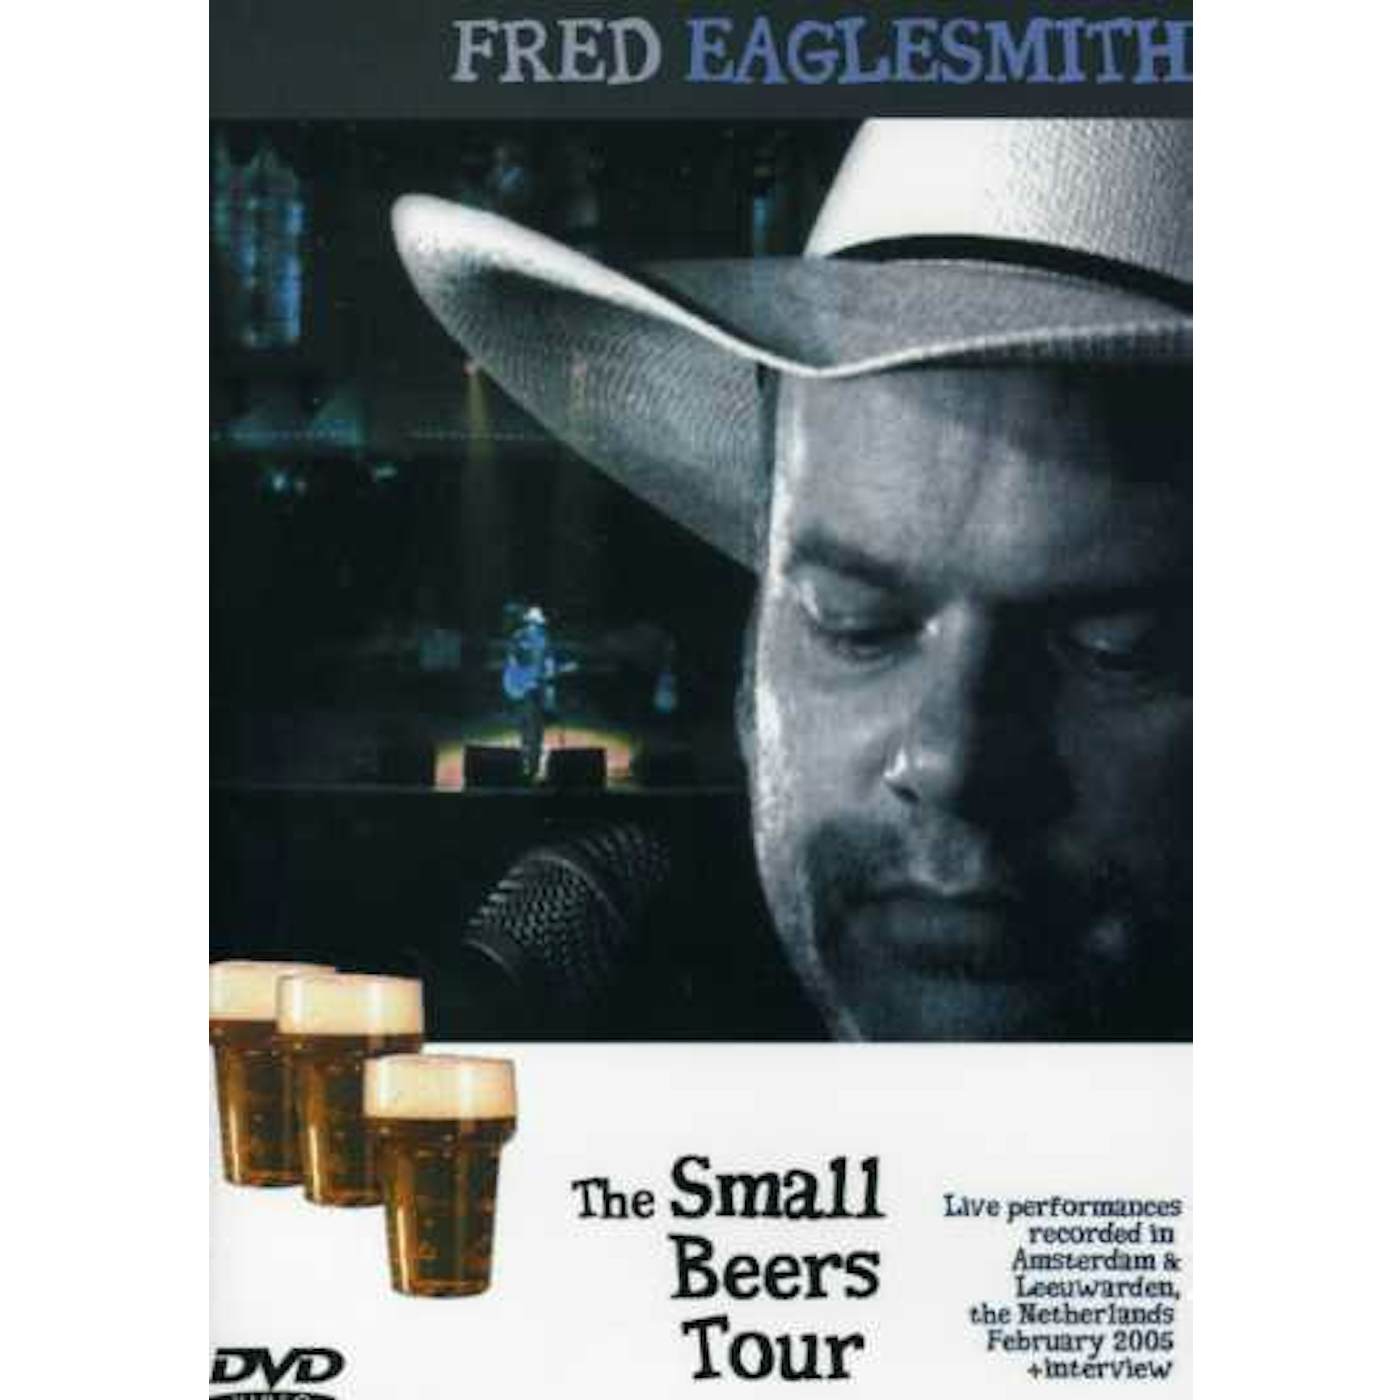 Fred Eaglesmith SMALL BEERS TOUR DVD